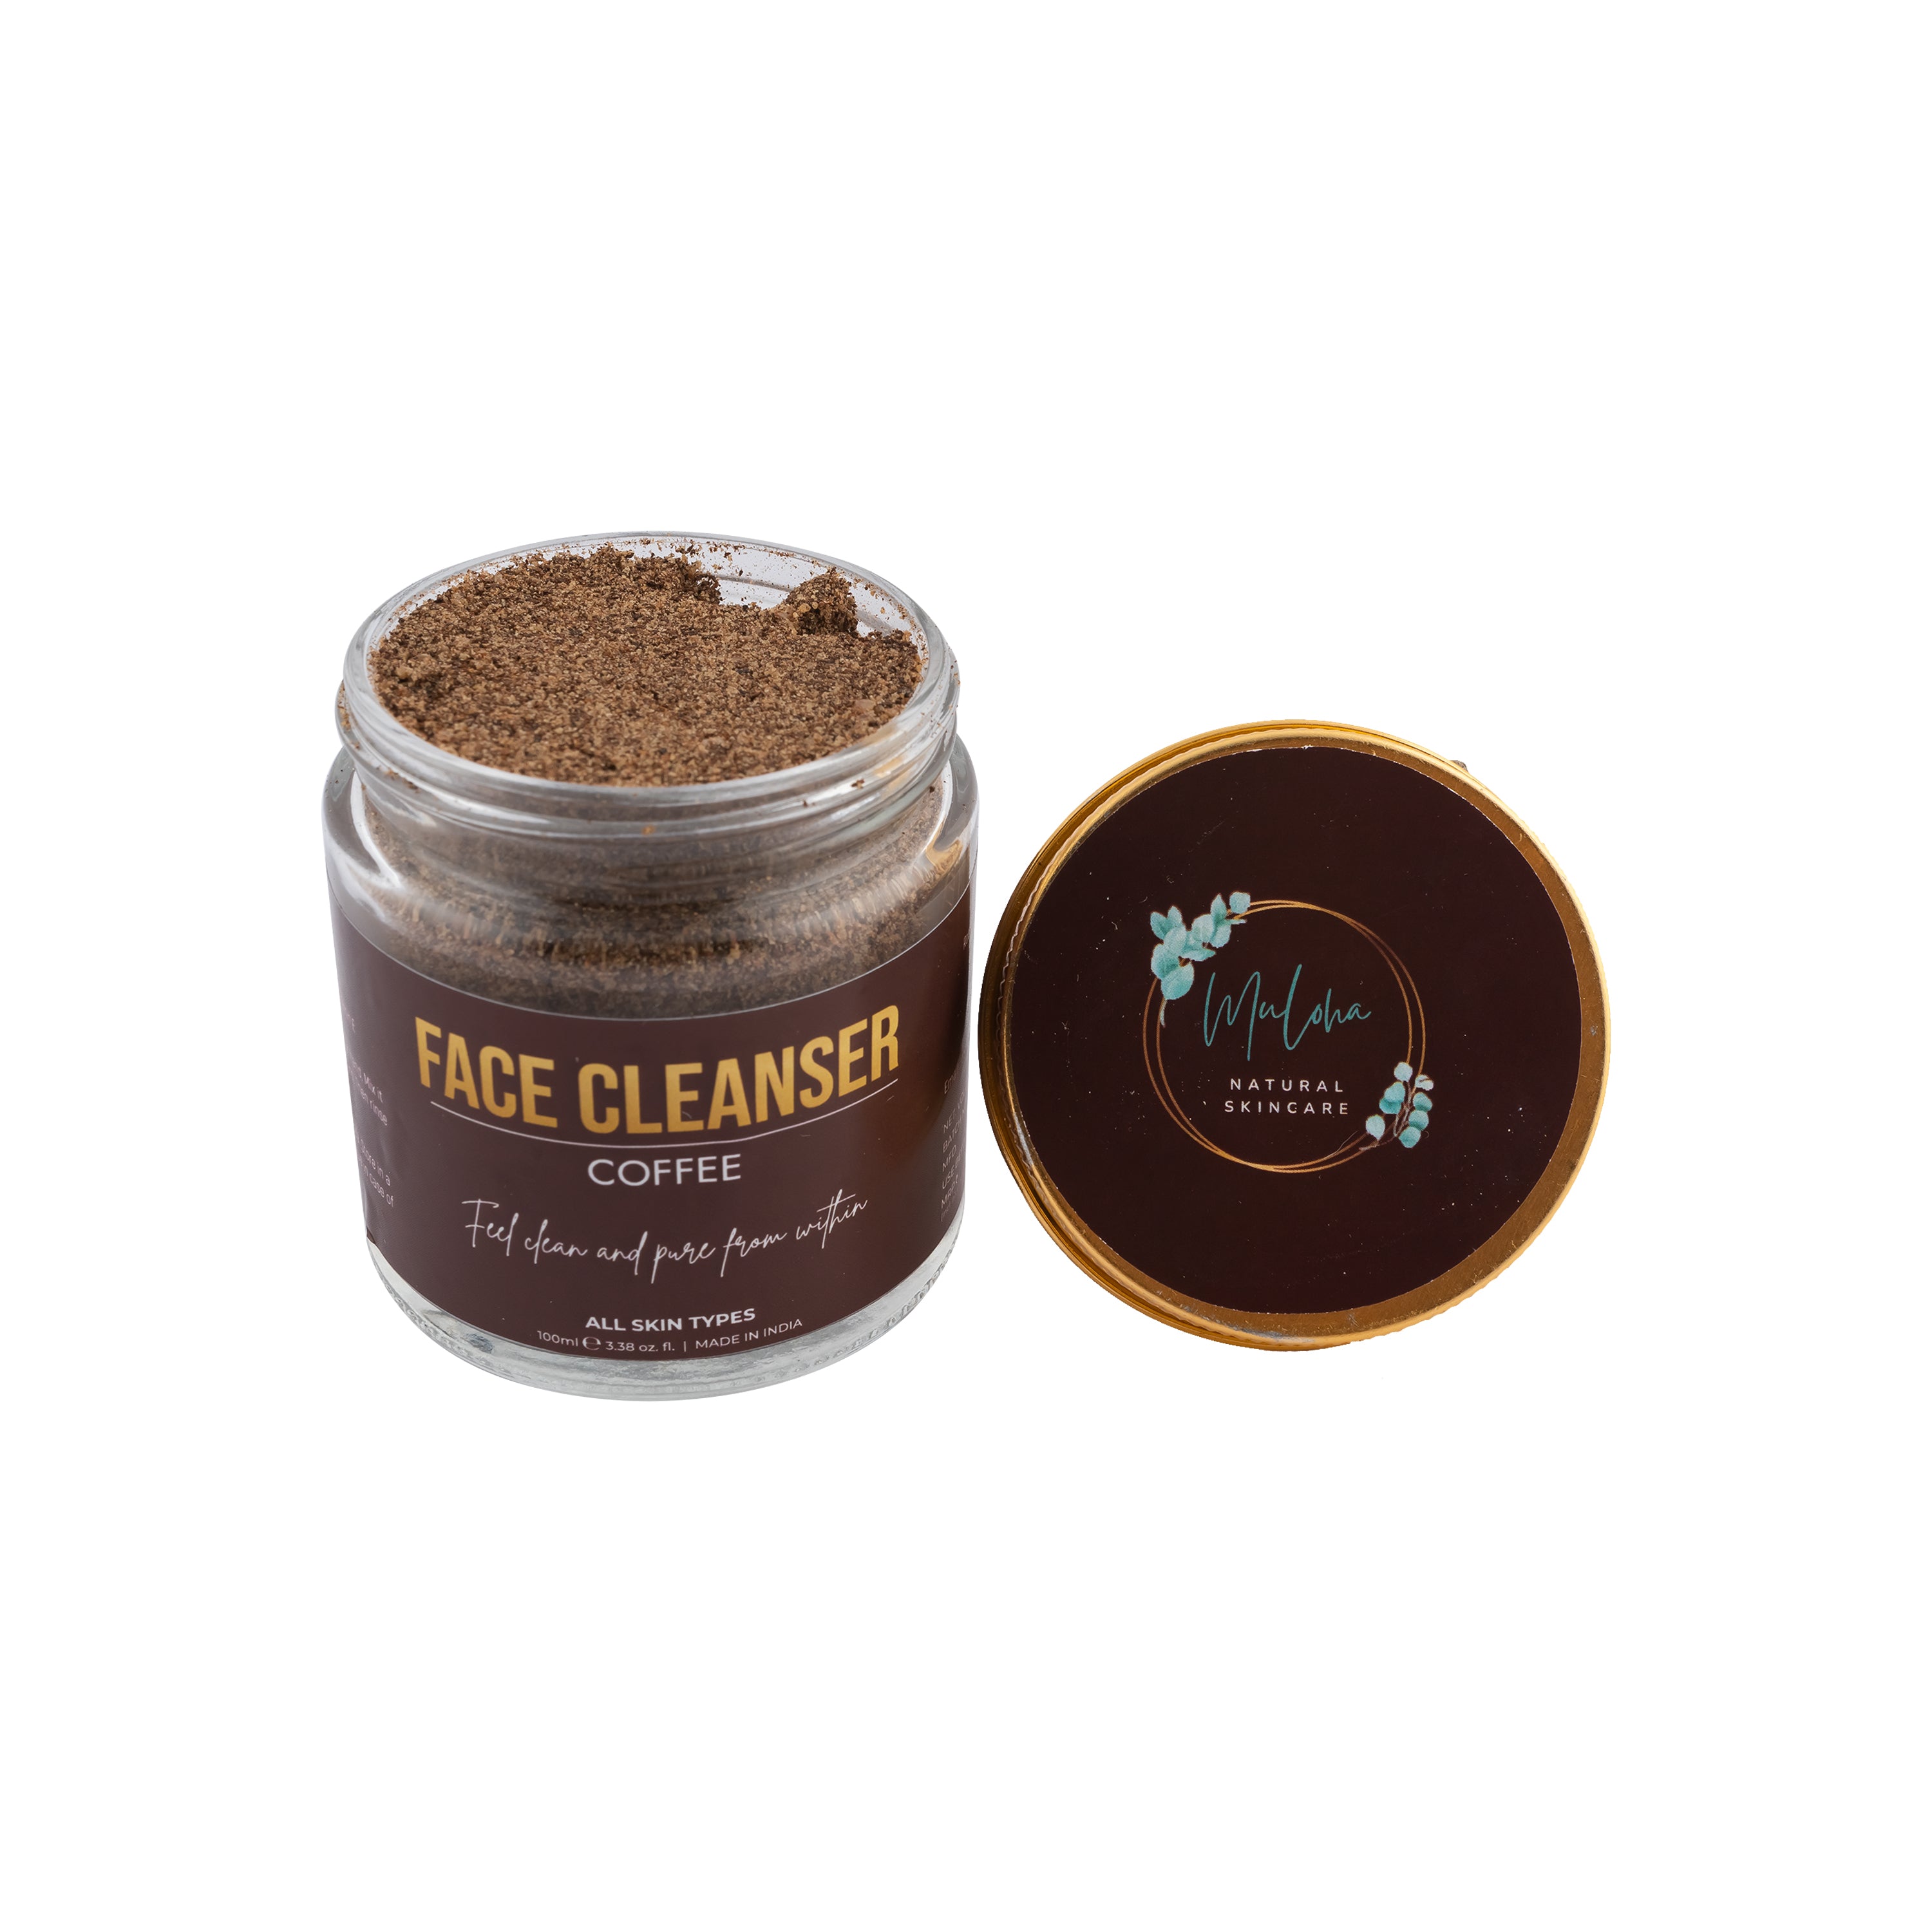 Muloha Coffee Face Cleansers